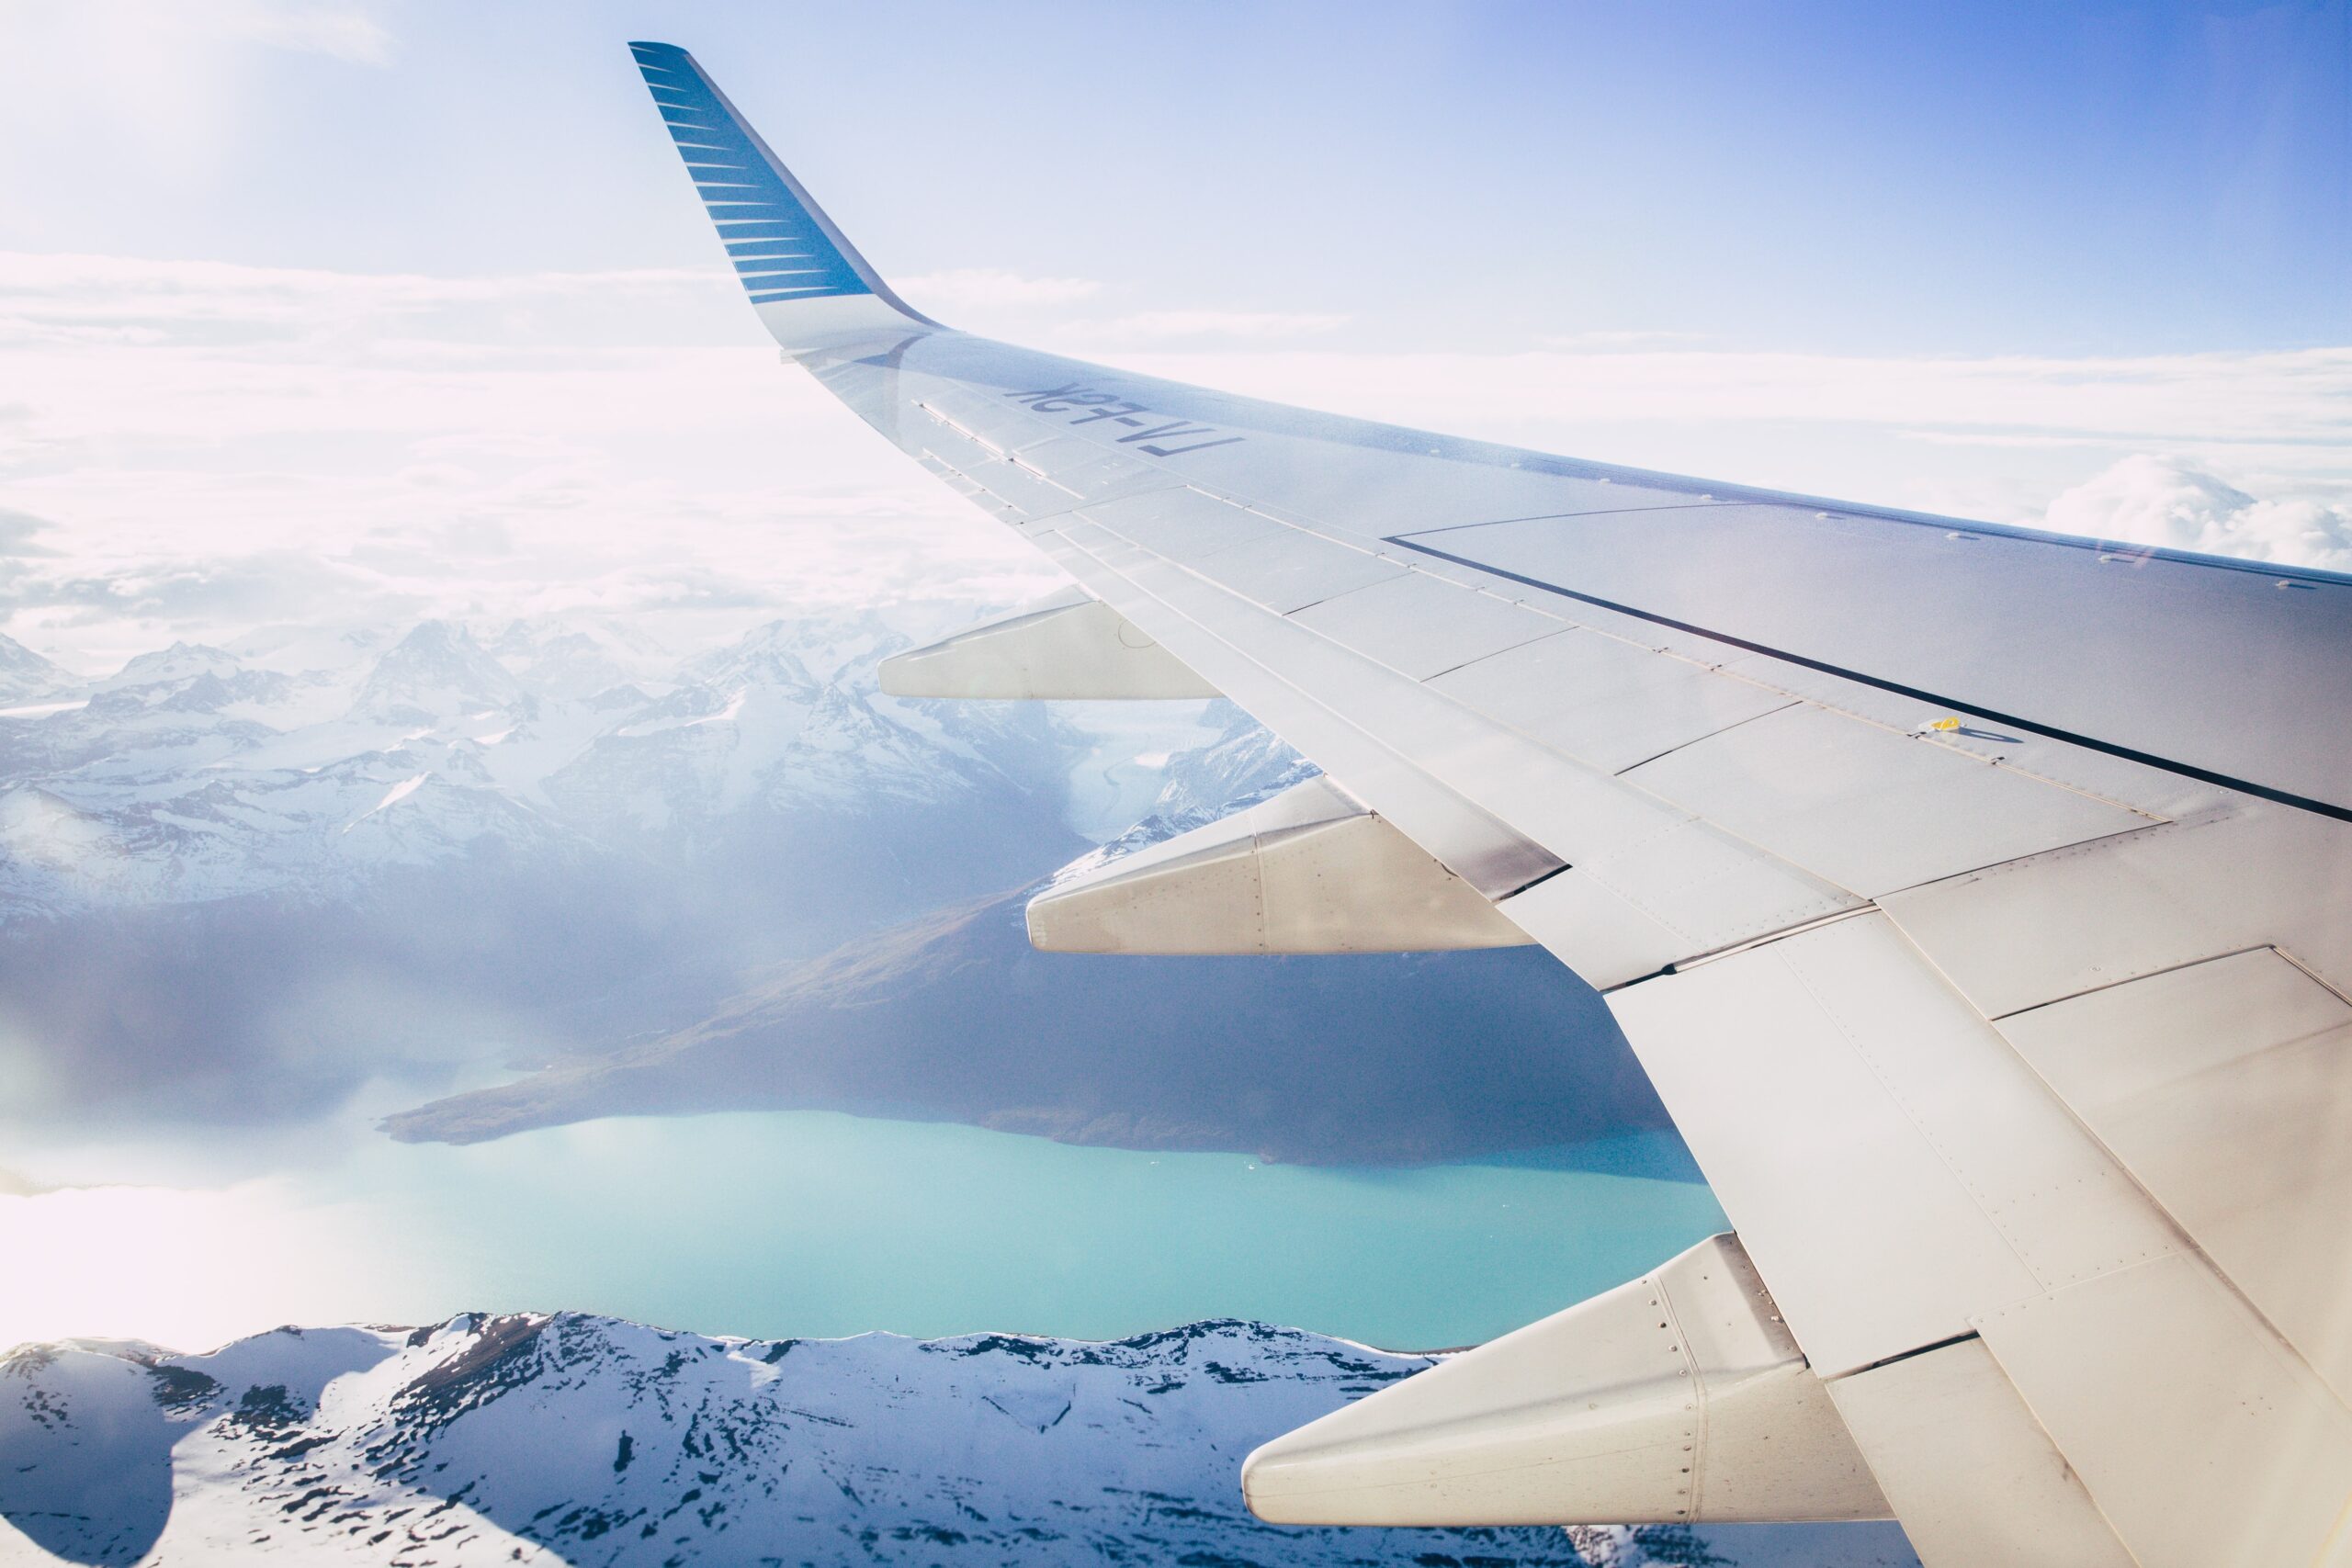 The wing of a plane flying above icy mountains